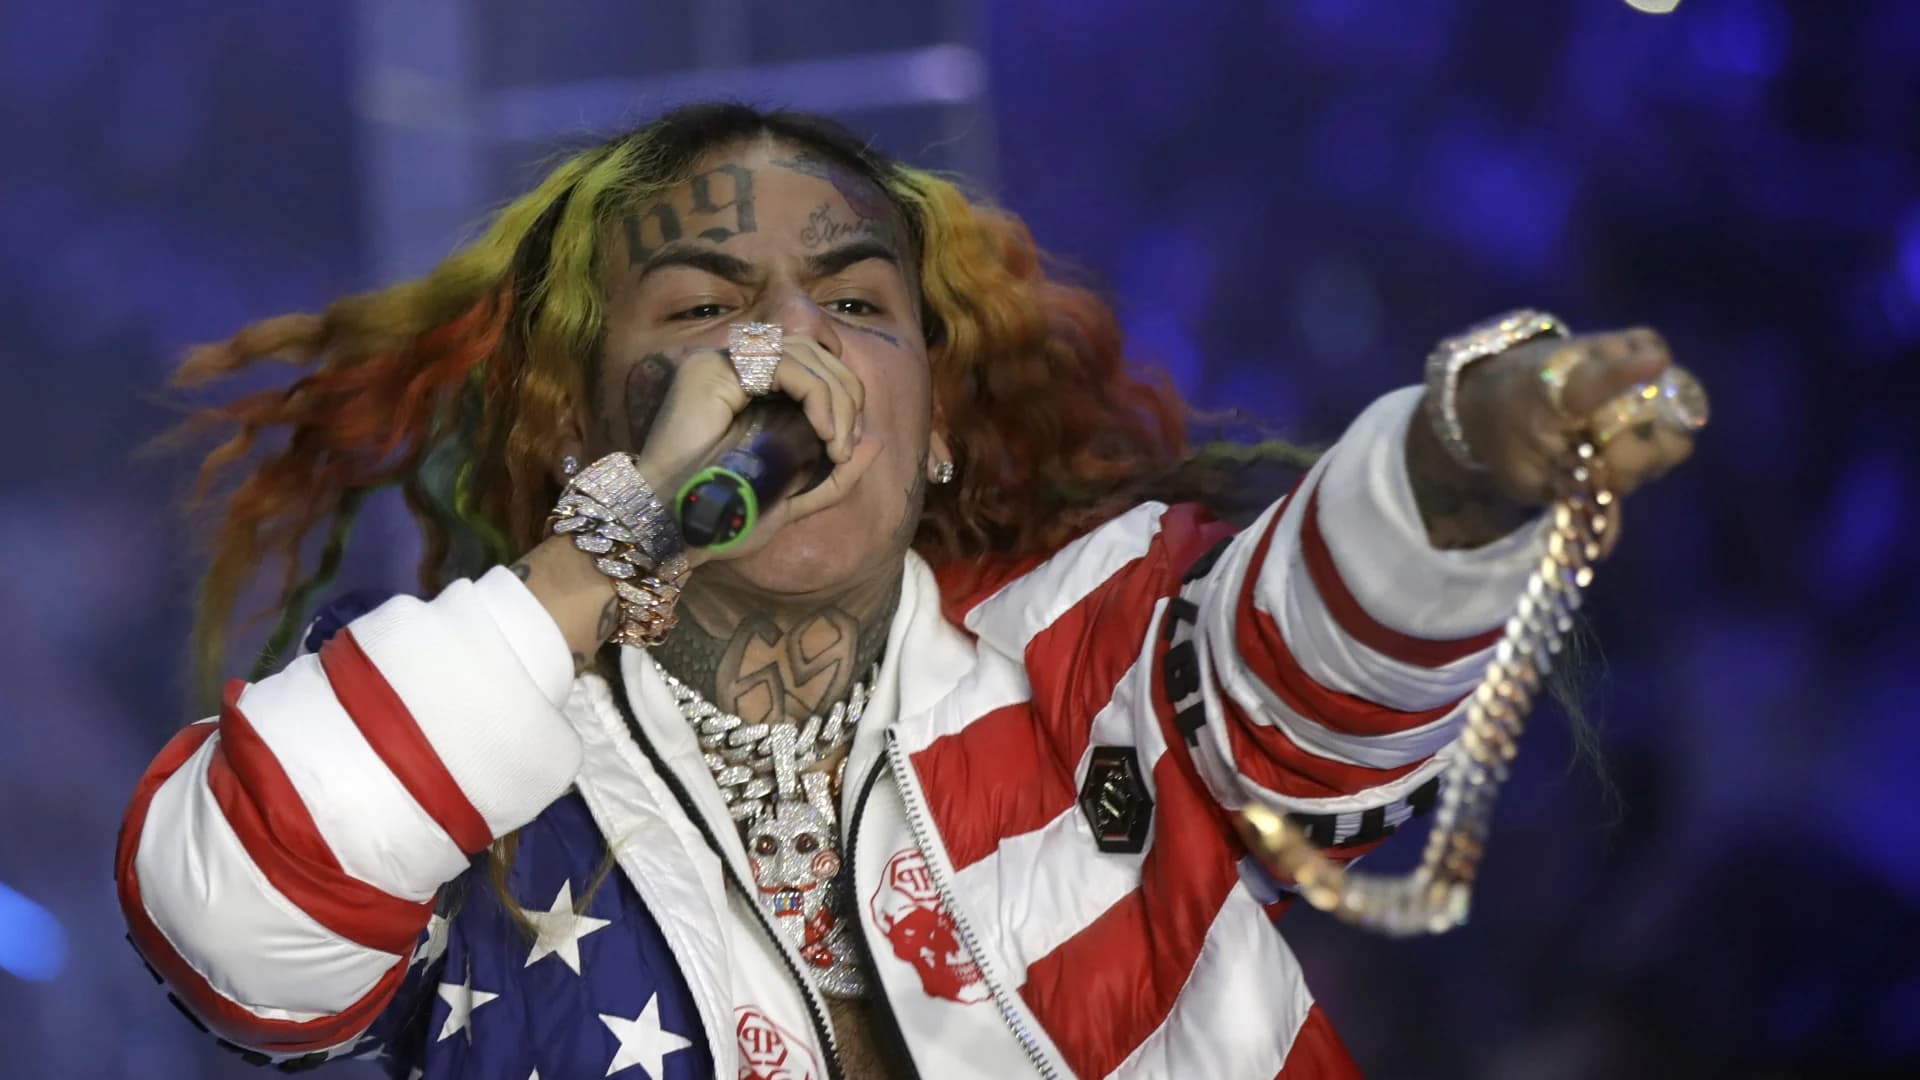 Dominican authorities arrest US rapper Tekashi 6ix9ine on domestic violence charges